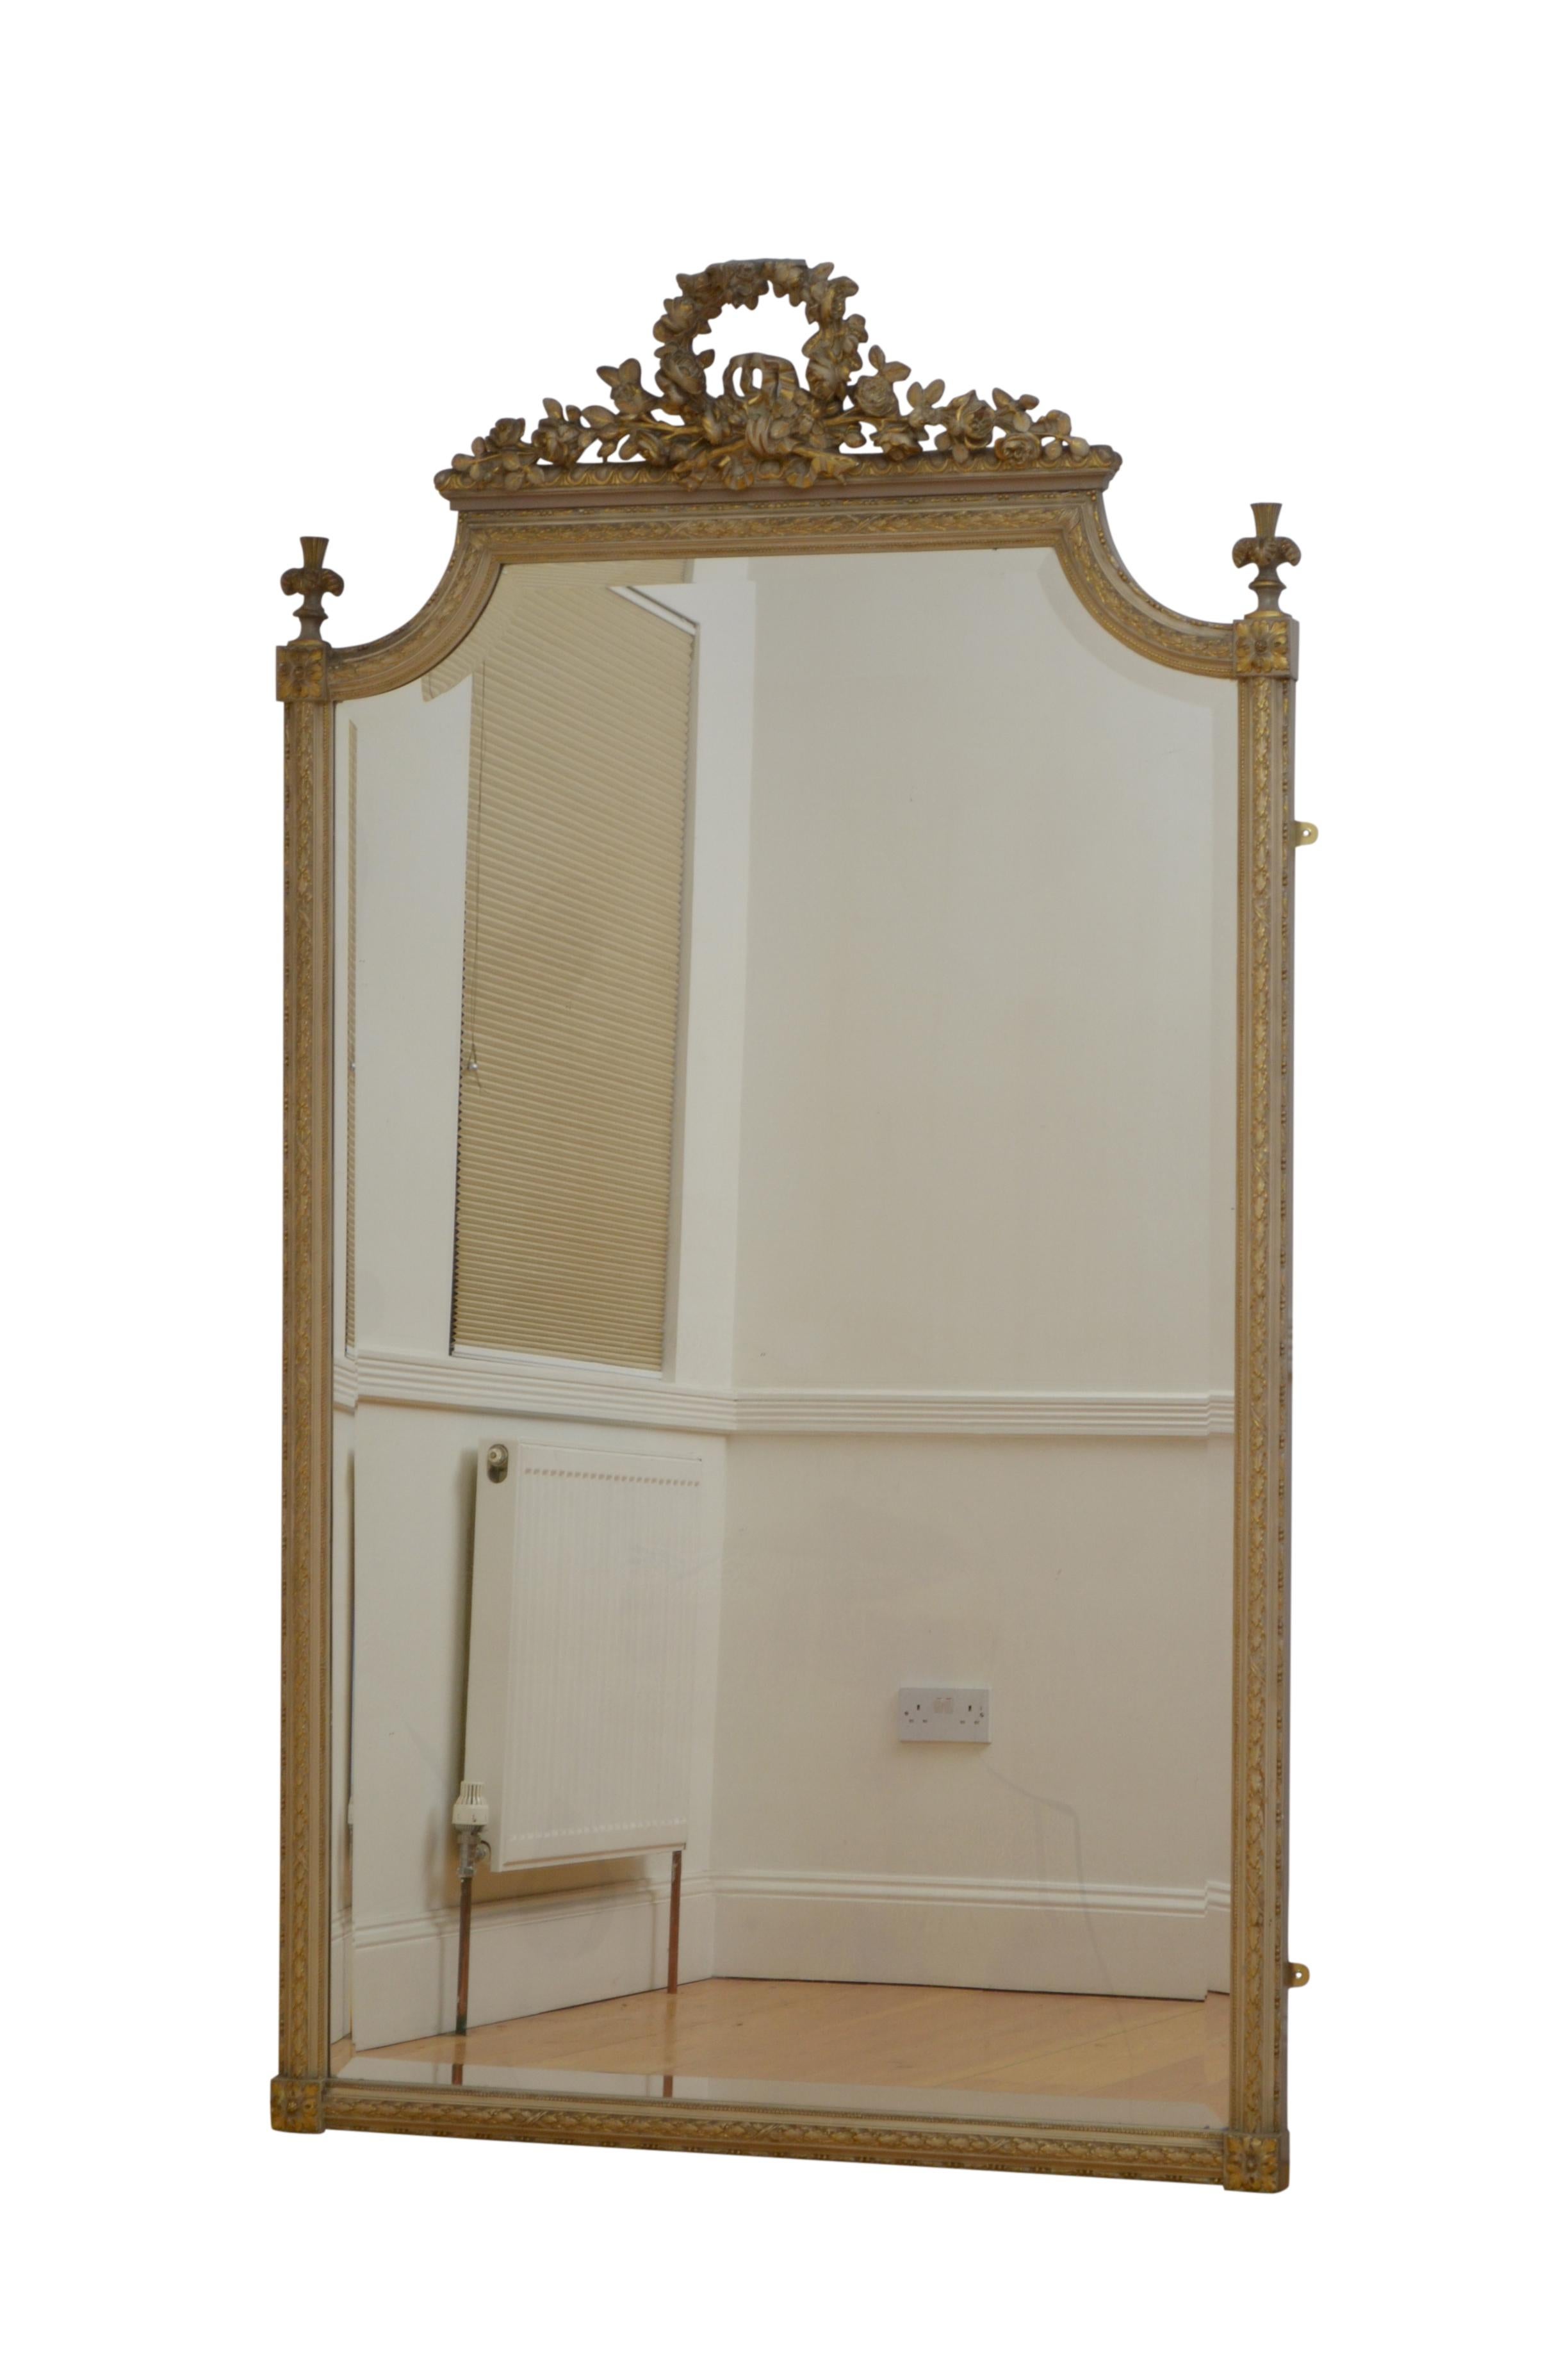 Superb 19th century leaner mirror or wall mirror, having original bevelled edge glass with minor foxing in moulded and carved painted and gilded frame with laurel leaf decoration and extensive floral crest in the shape of a wreath flanked by